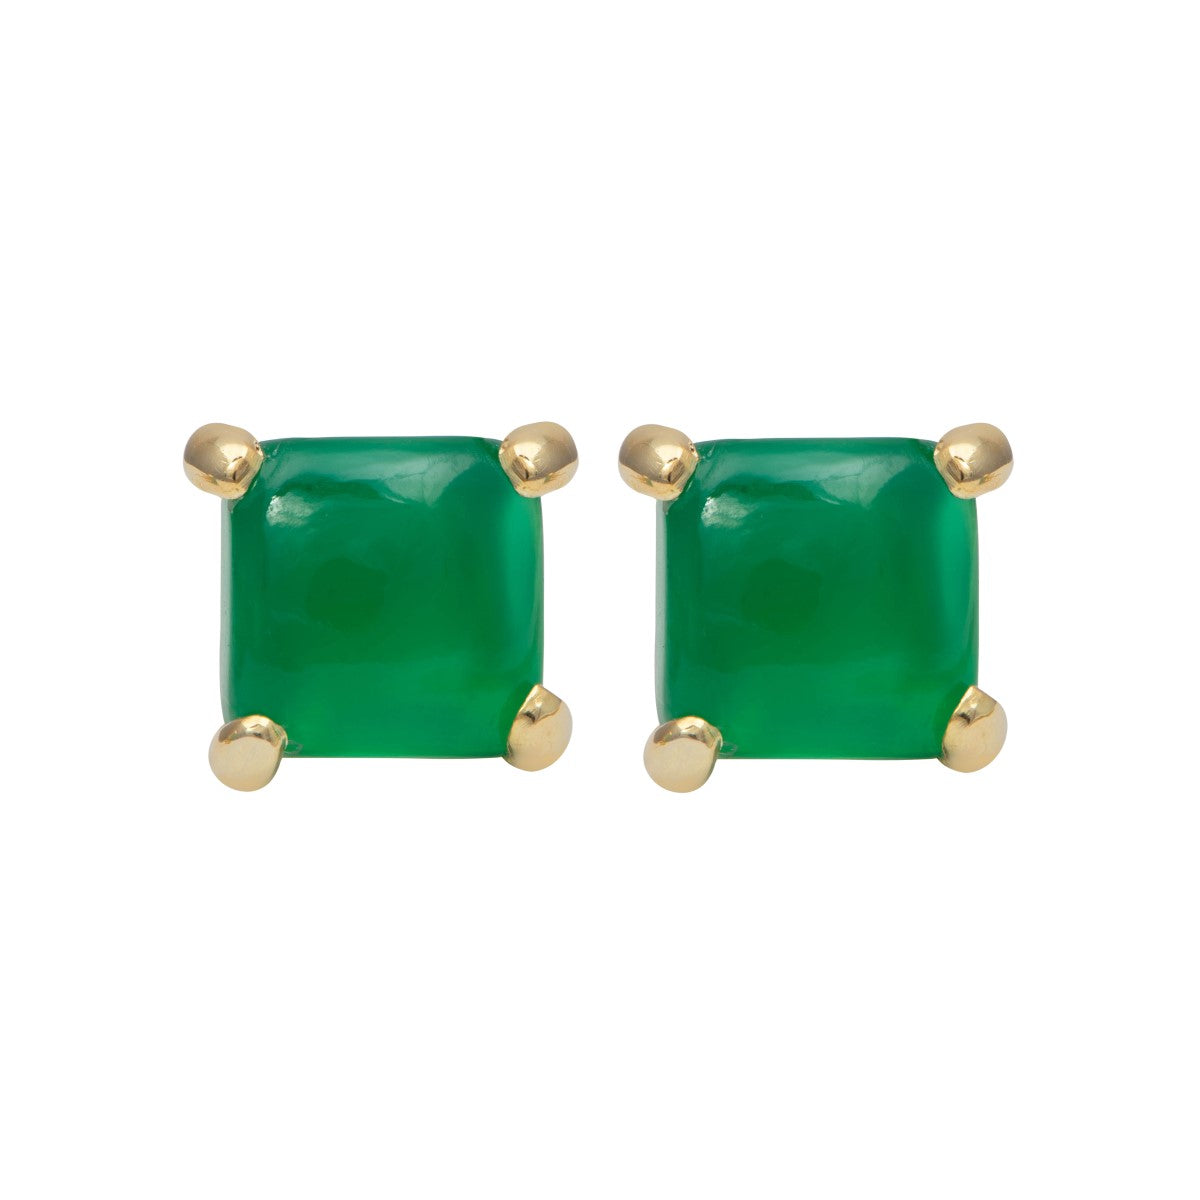 Square Cabochon Green Onyx Stud Earrings in Gold Plated Sterling Silver